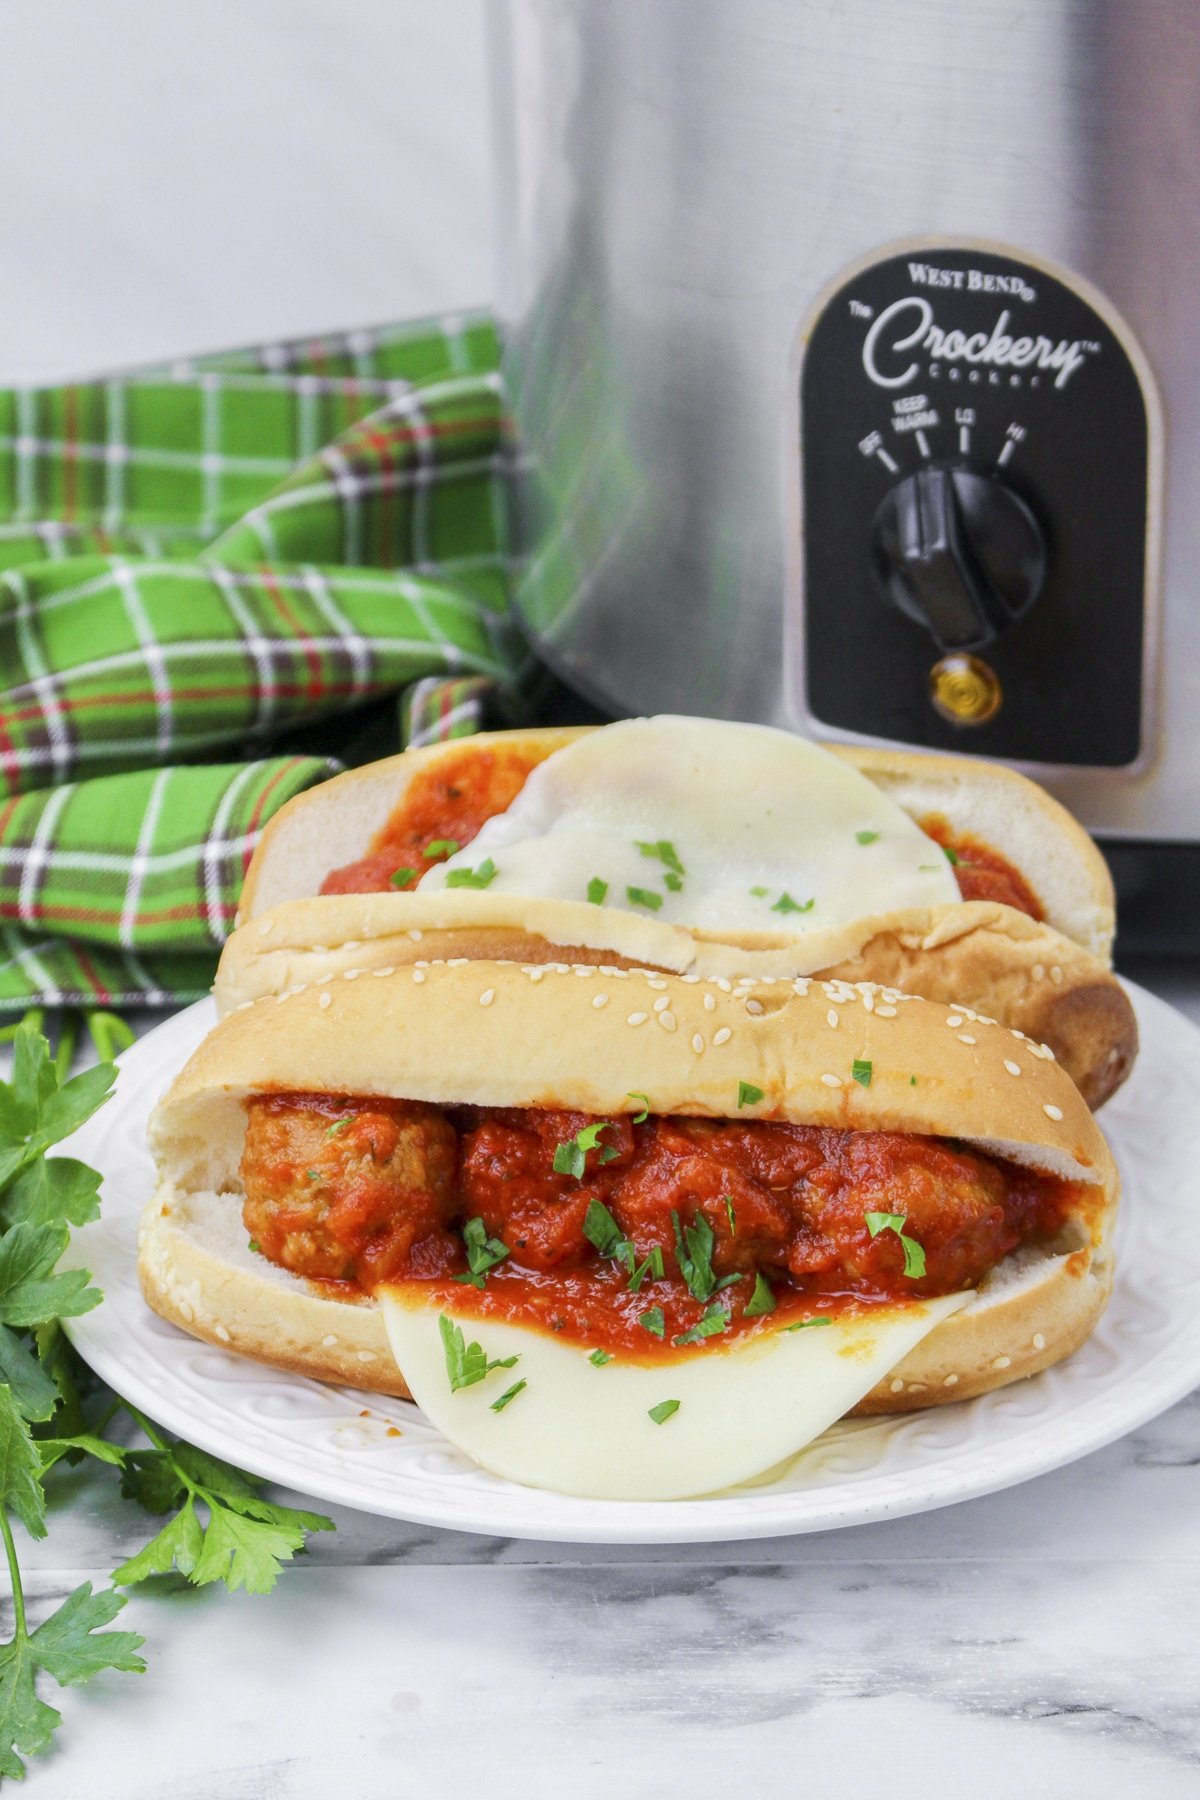 meatballs subs in front of slow cooker.